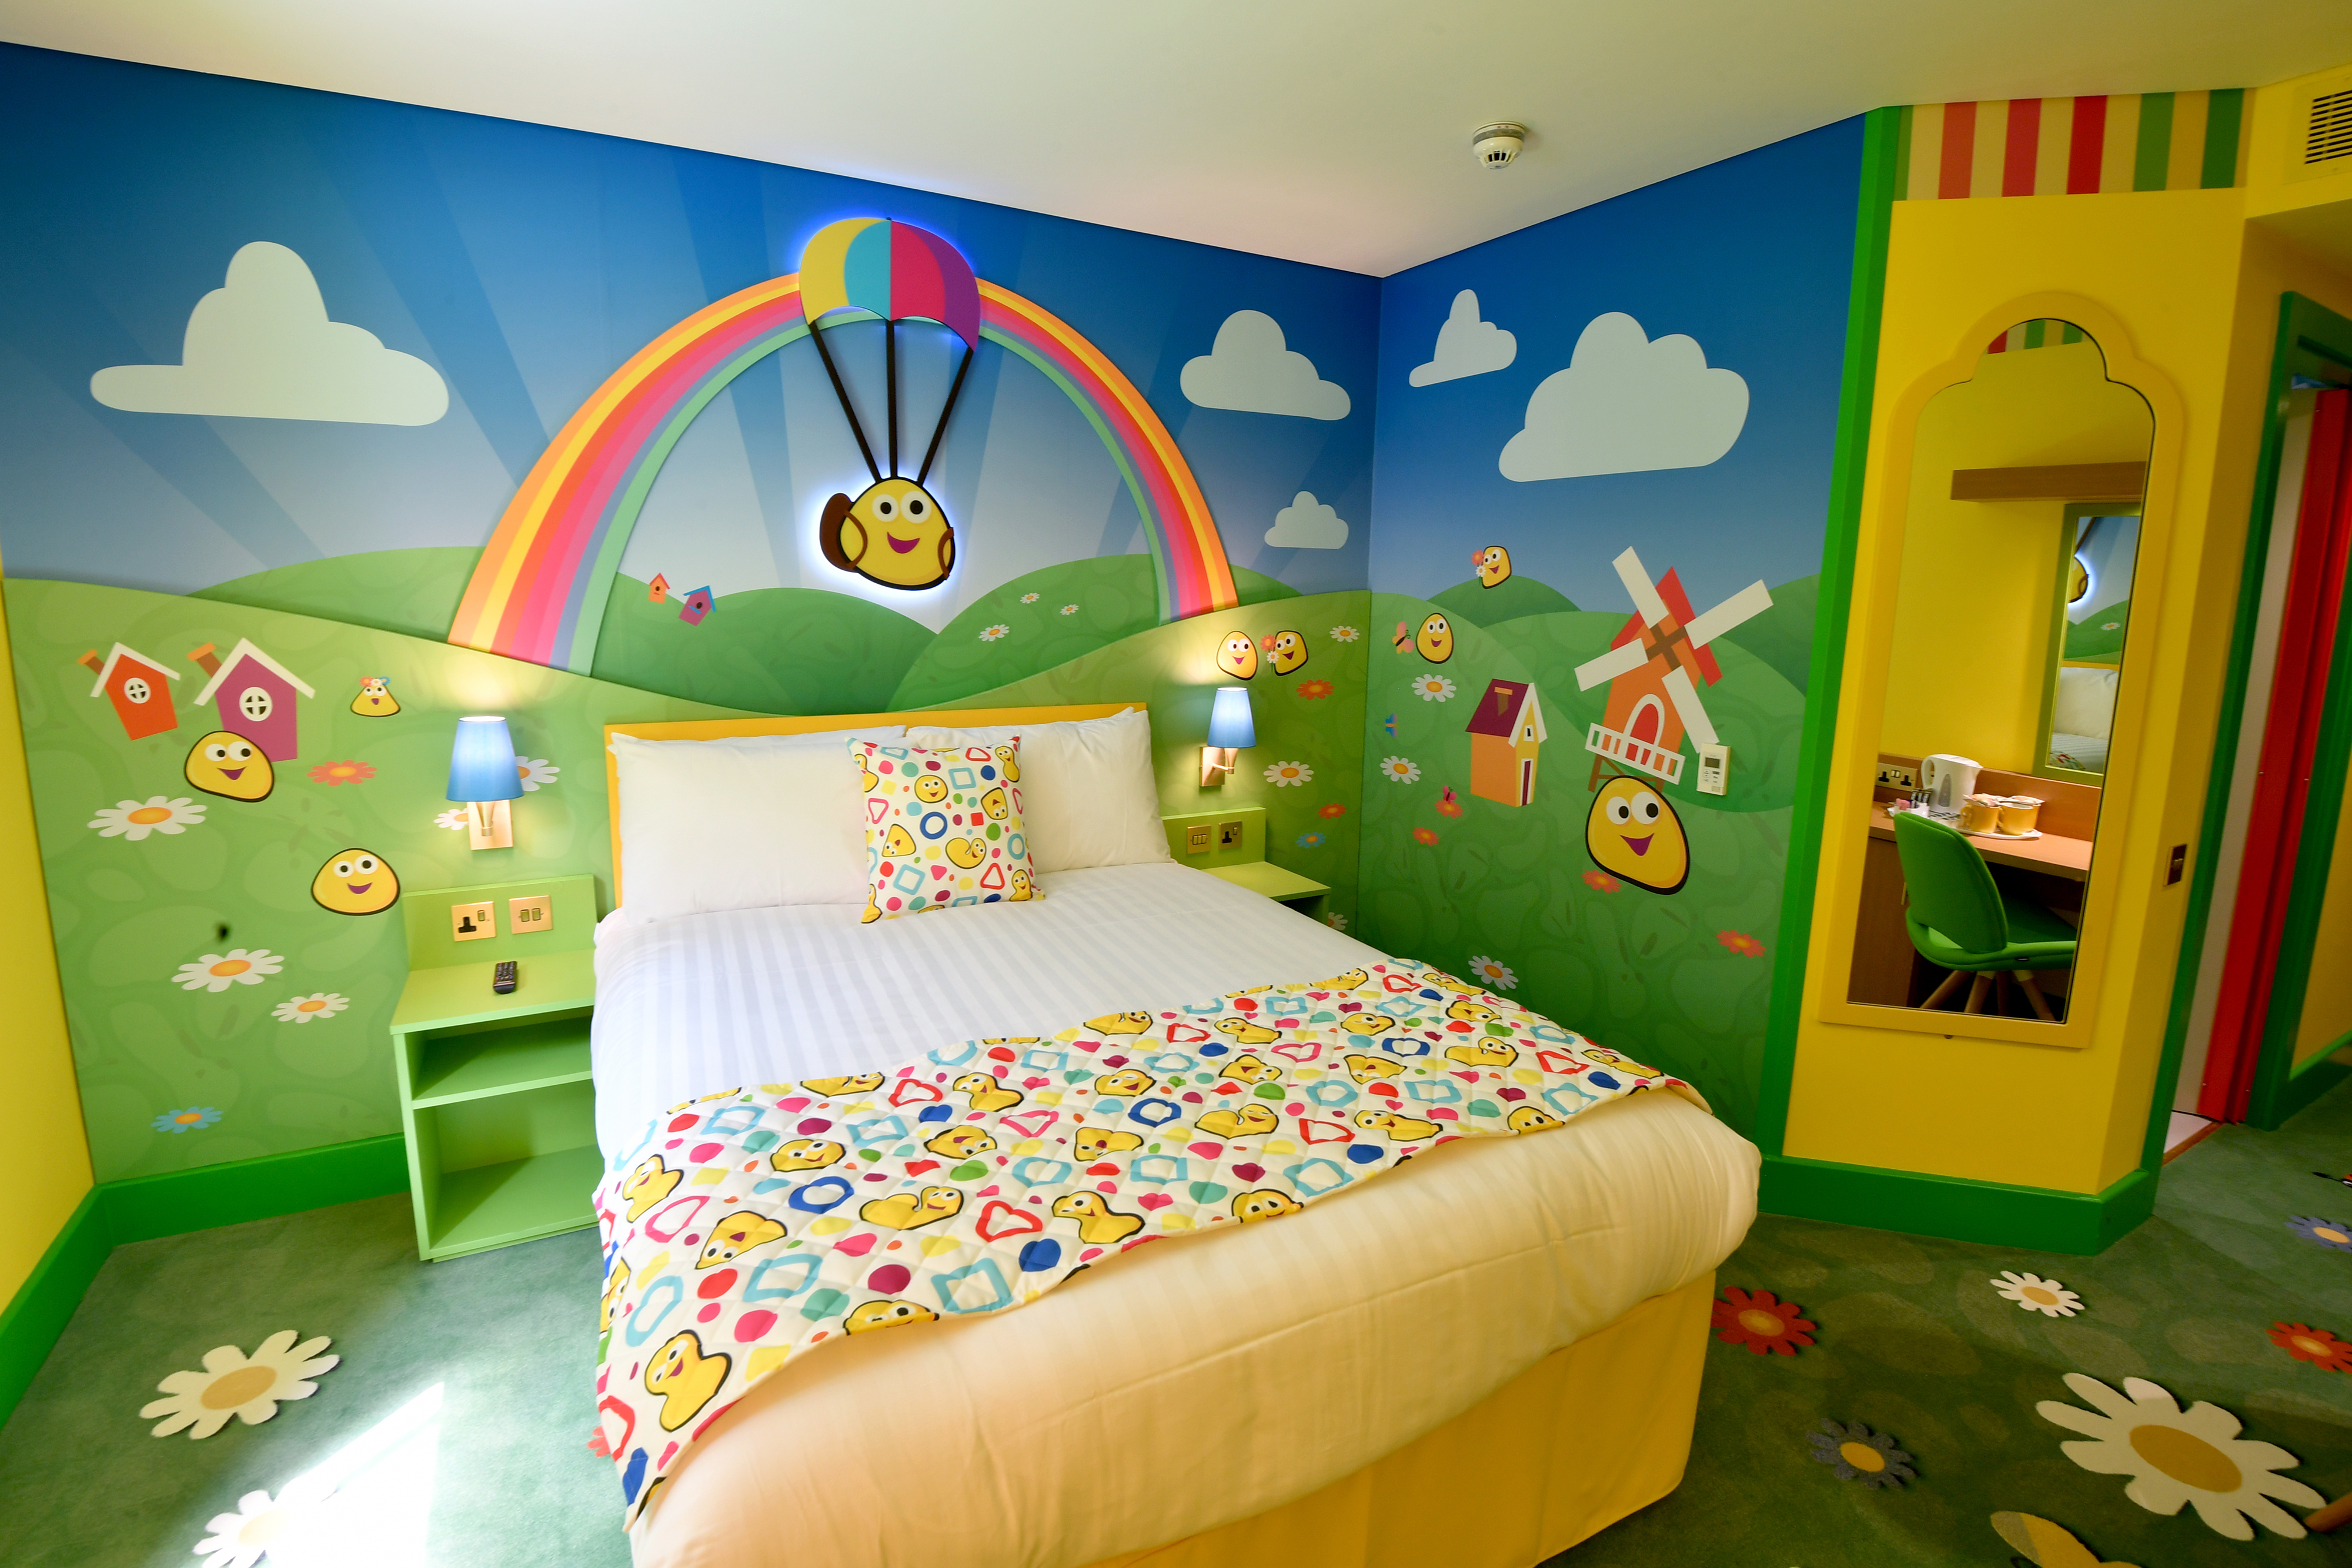 CBeebies Land Hotel at the Alton Towers Resort